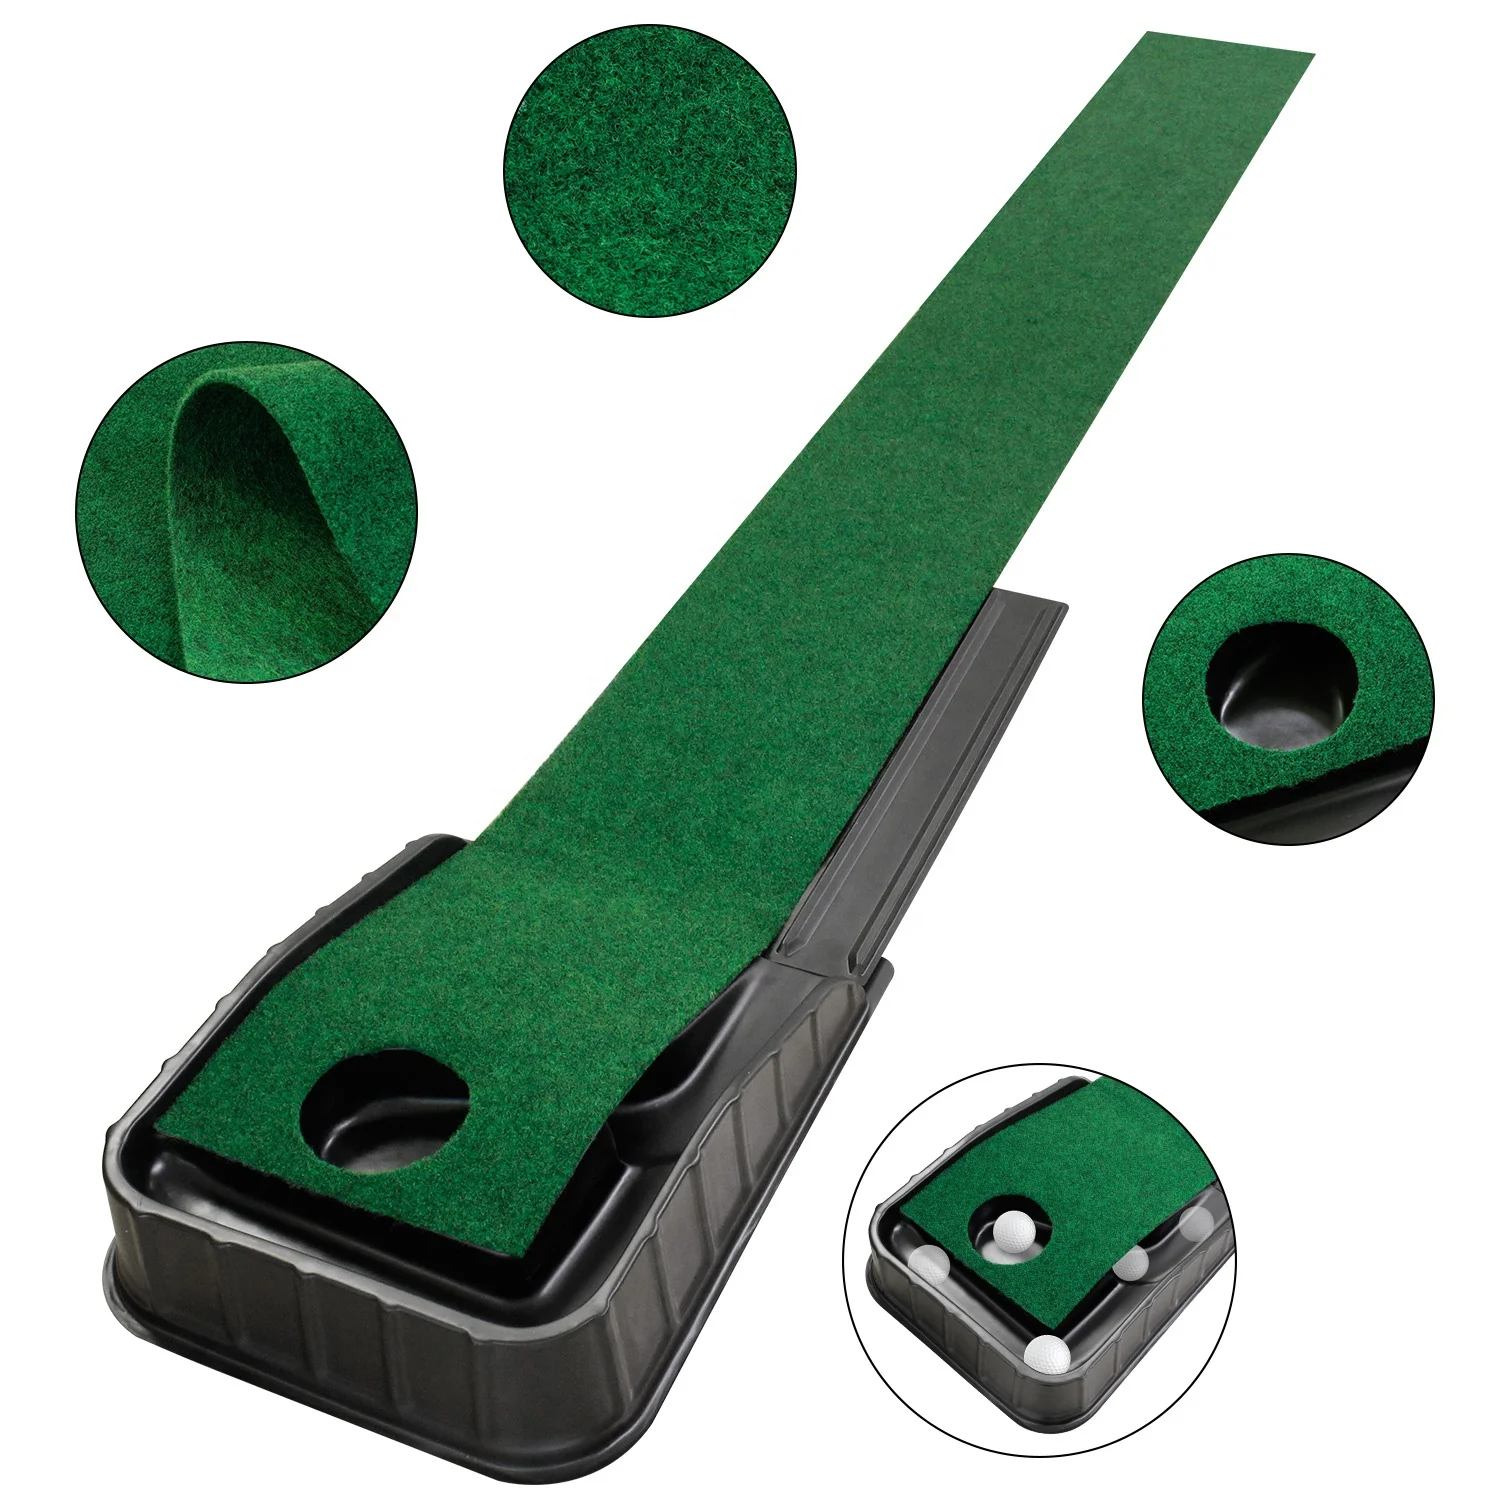 

Golf Putting Green 7.33FT*1FT Golf Putting Trainer Mini Golf Mat with Auto Ball Return Function for Home/Outdoor/Office Use